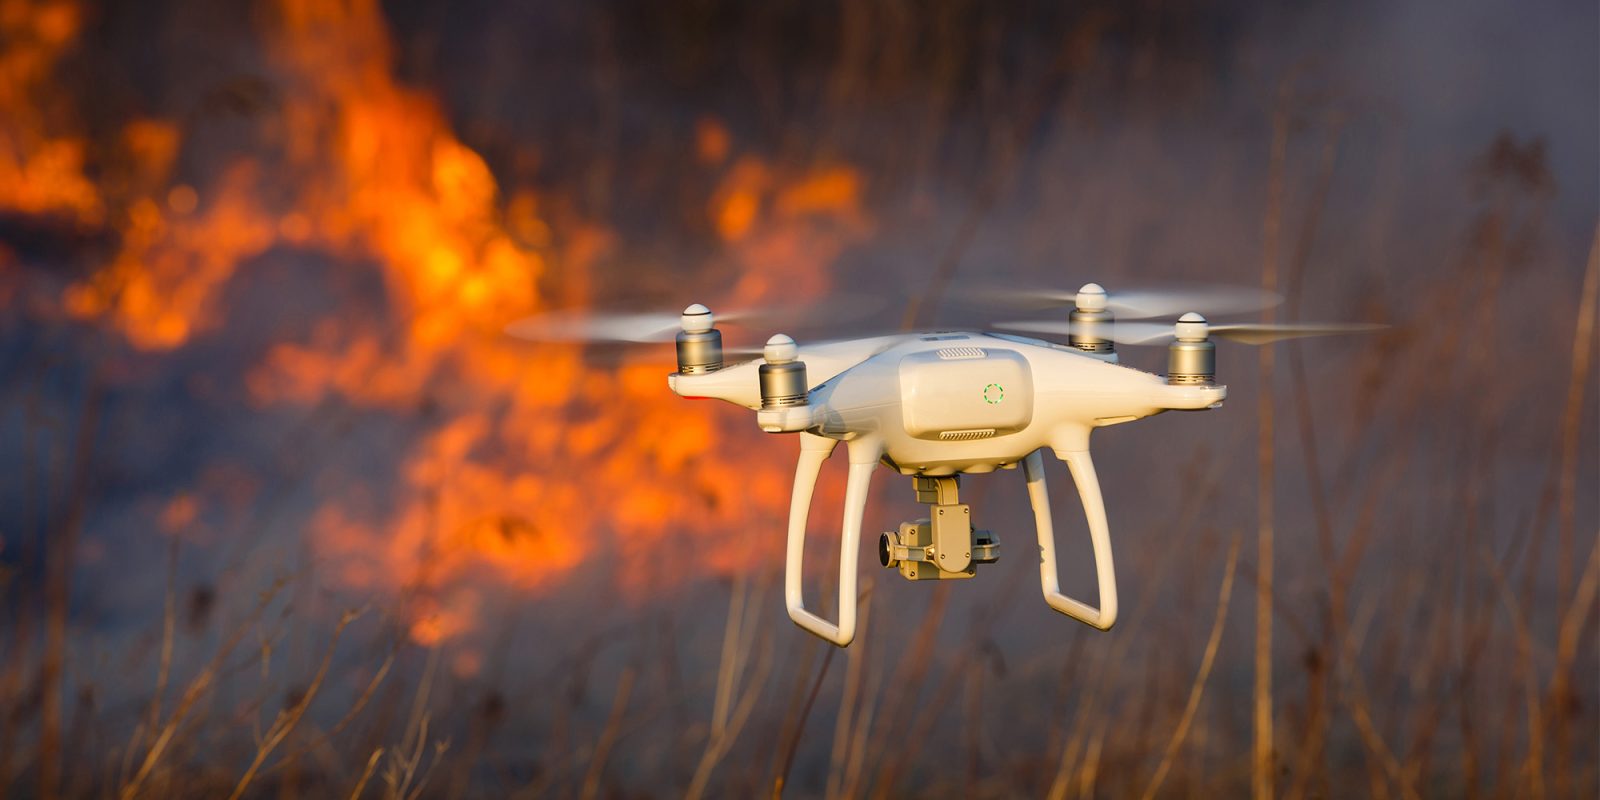 rogue drone stopped firefighters